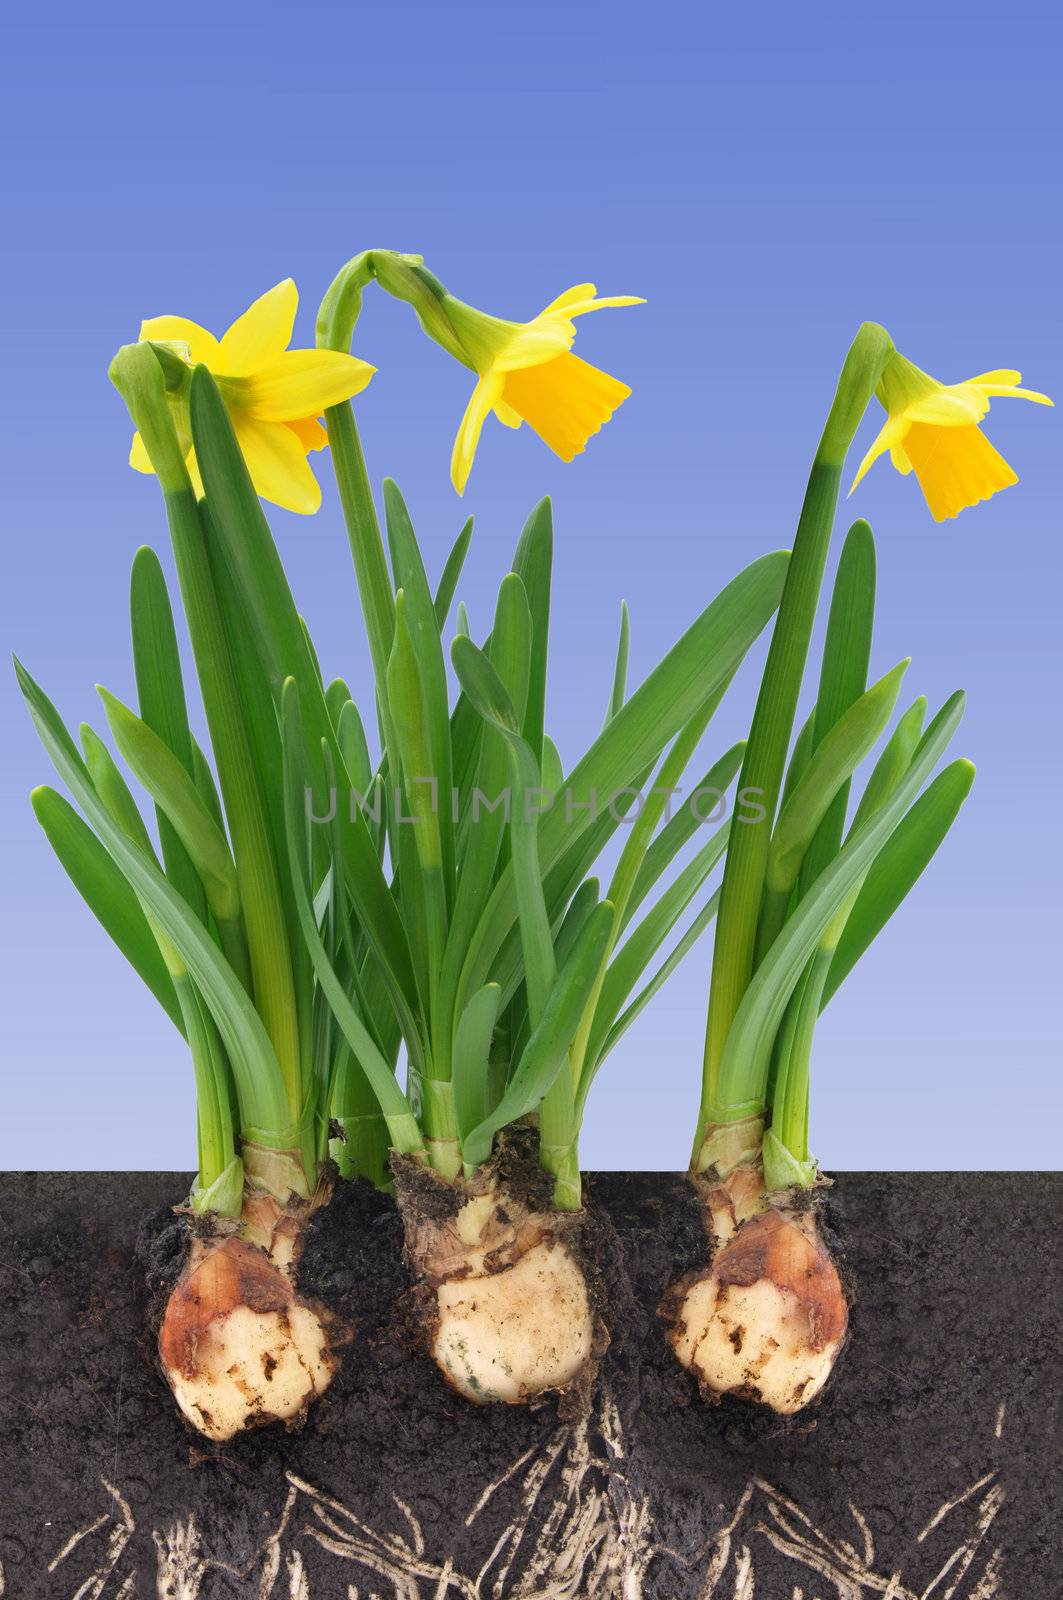 Spring daffodils with bulbs and roots planted in soil